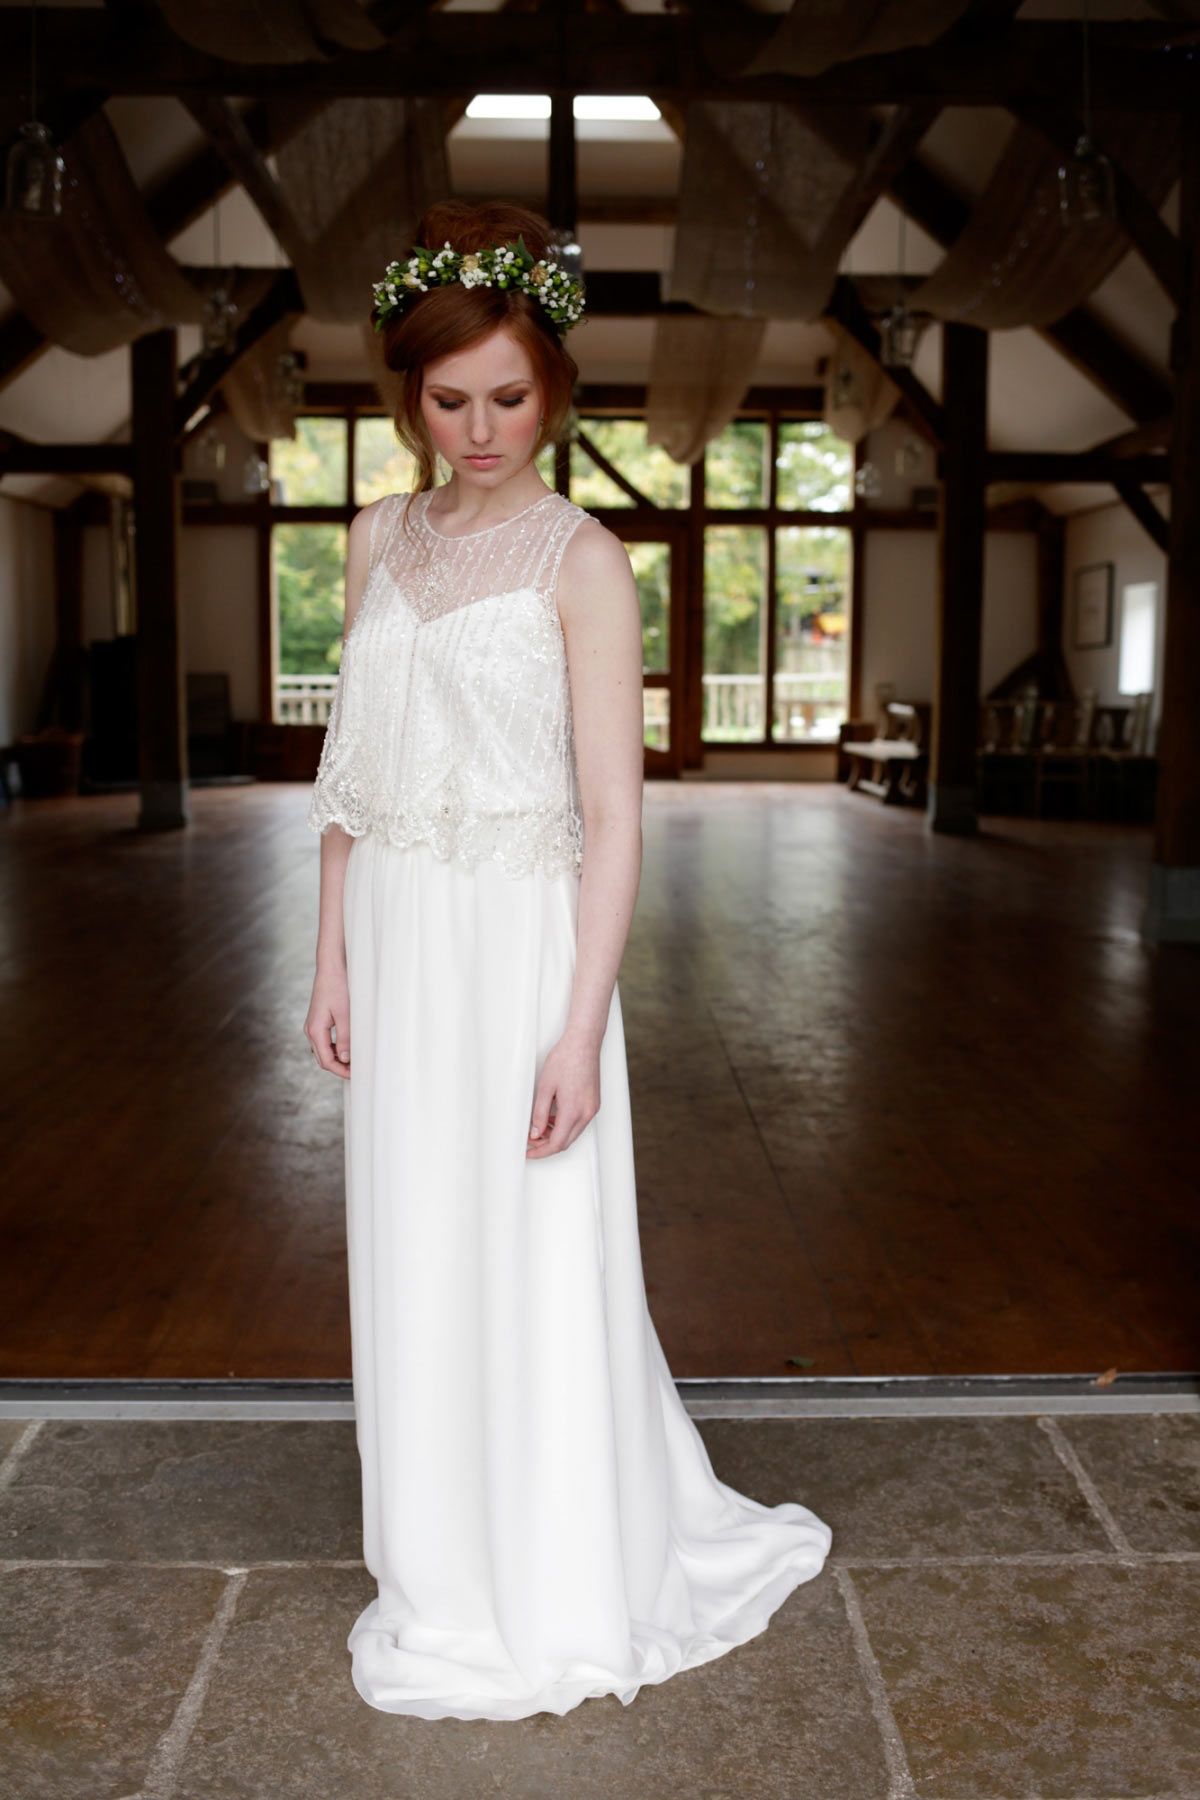 Introducing the Perl Collection from Claire L. Headdon Bridal Designs